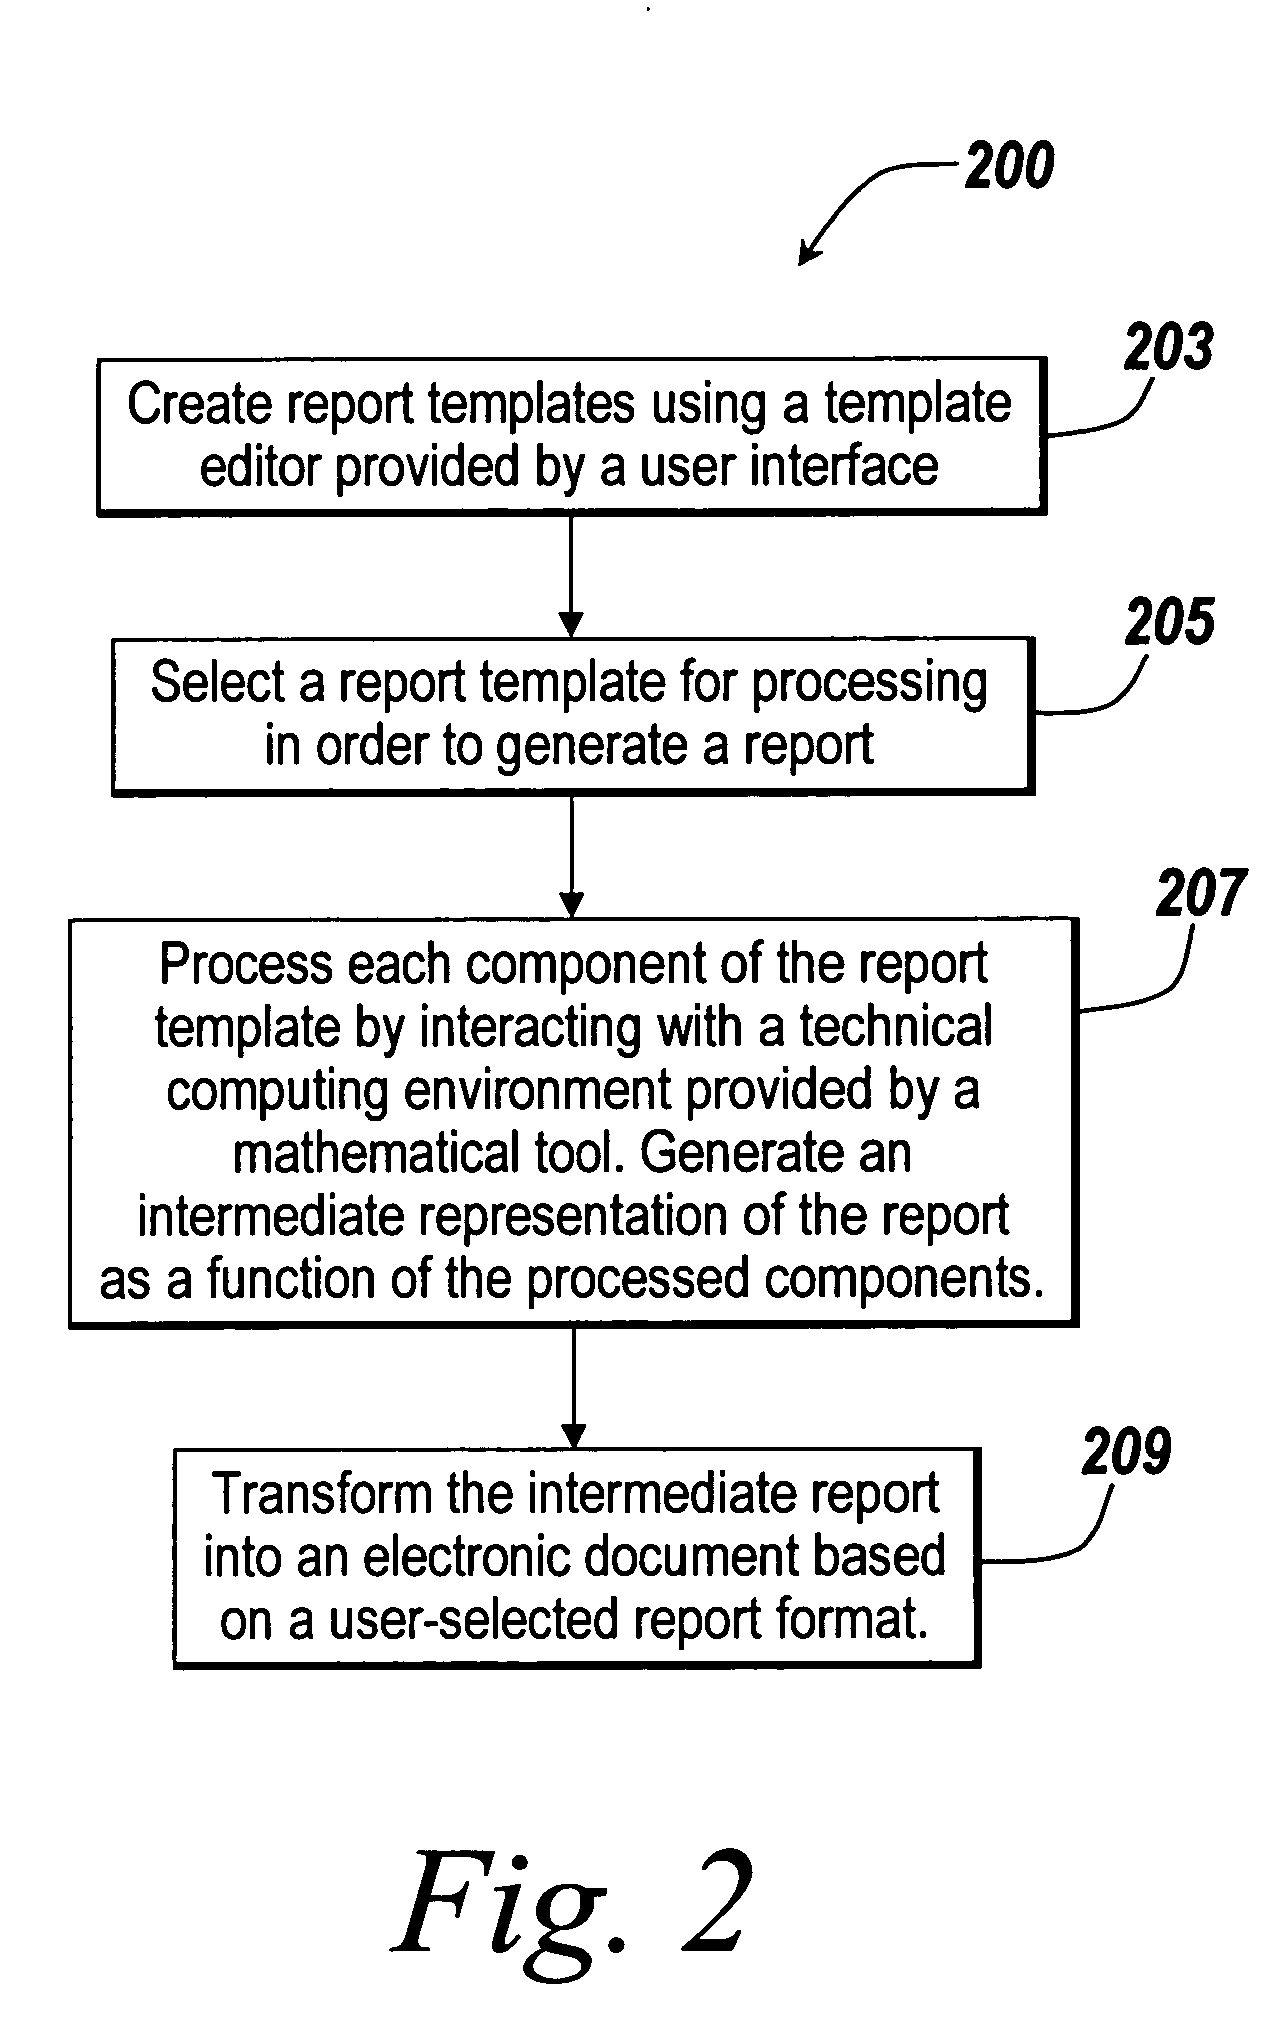 Report generator for a mathematical computing environment